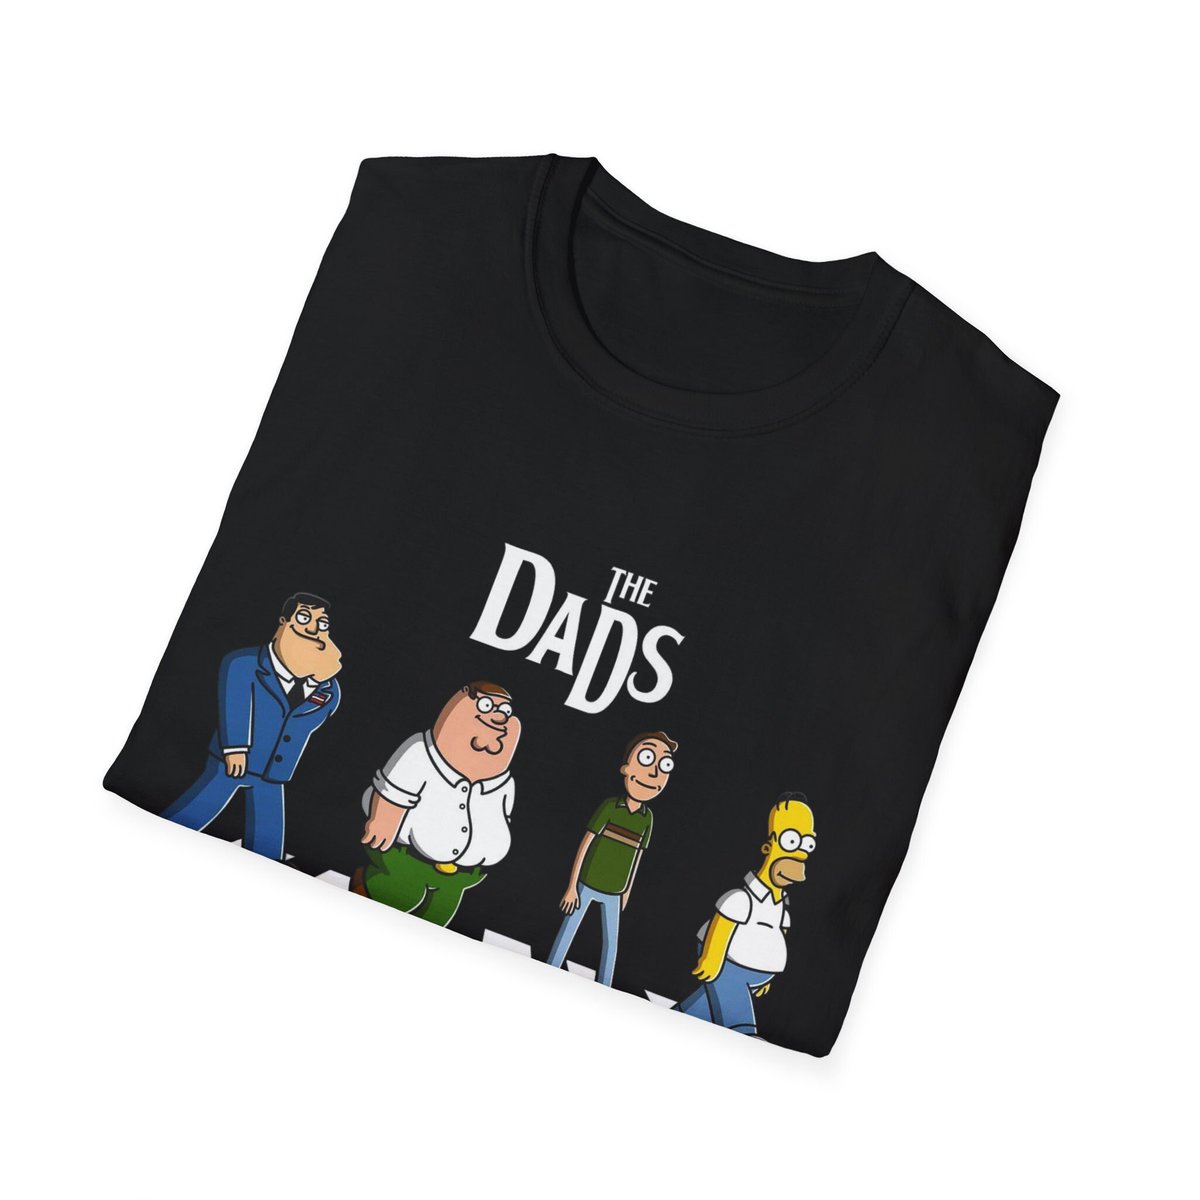 Family guy collection 🥳🔥
Buy now

vividbrandstore.etsy.com

#etys #new #tee #famliyguy #amricandad #tvshow #show #street #streetwear #streetstyle #RickandMorty #style #brand #etsyfinds #etsygift #home #love